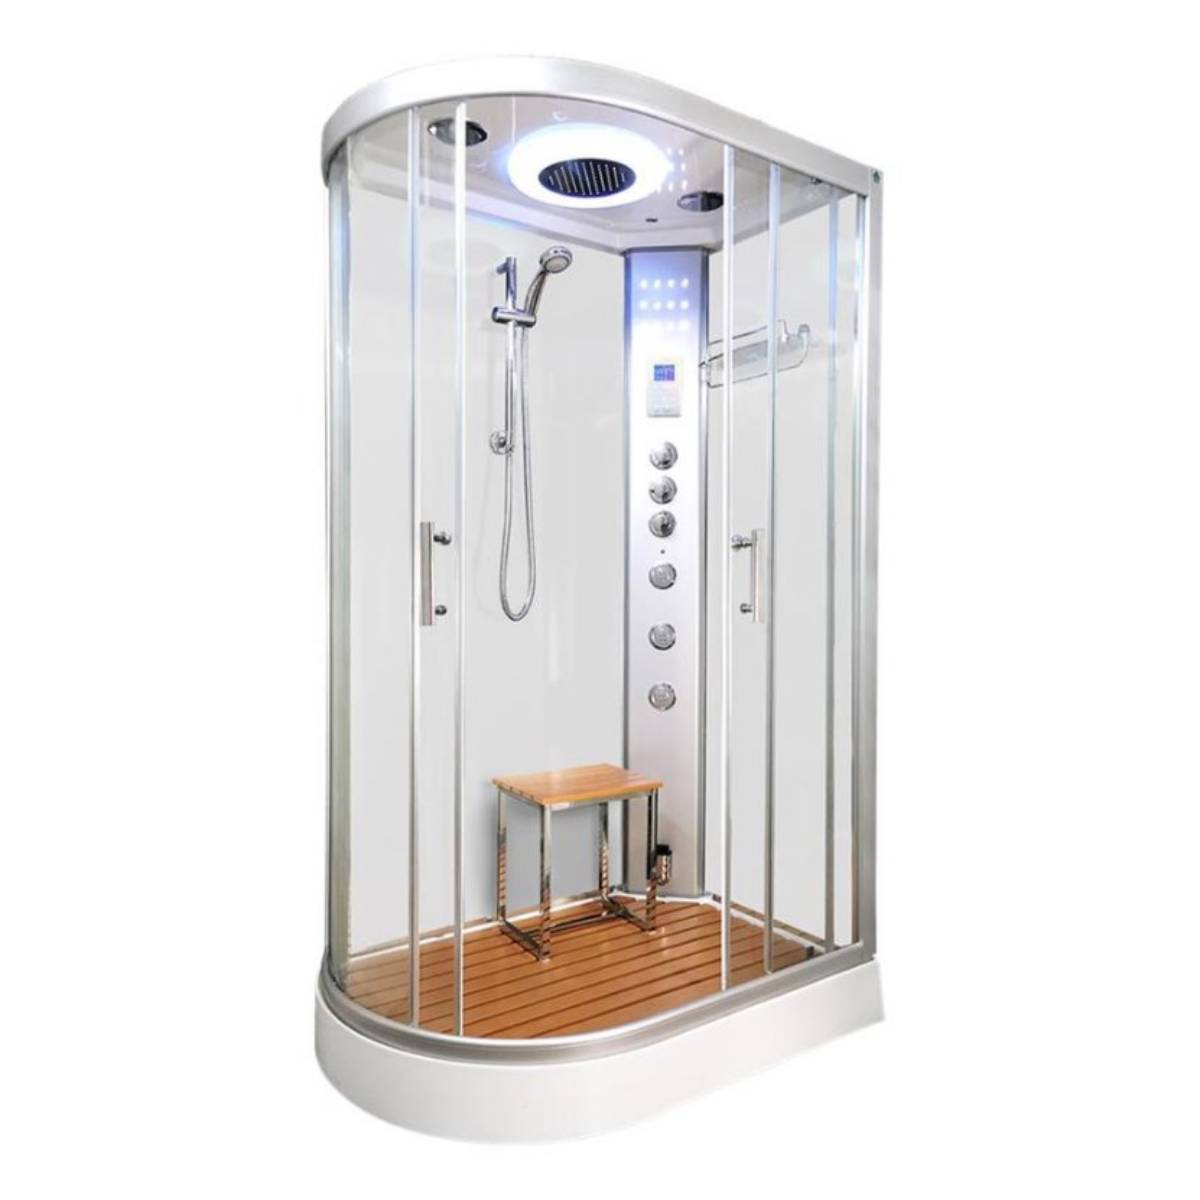 Vidalux Clearwater 1200mm Steam Shower Enclosure Right Hand - White (11498)